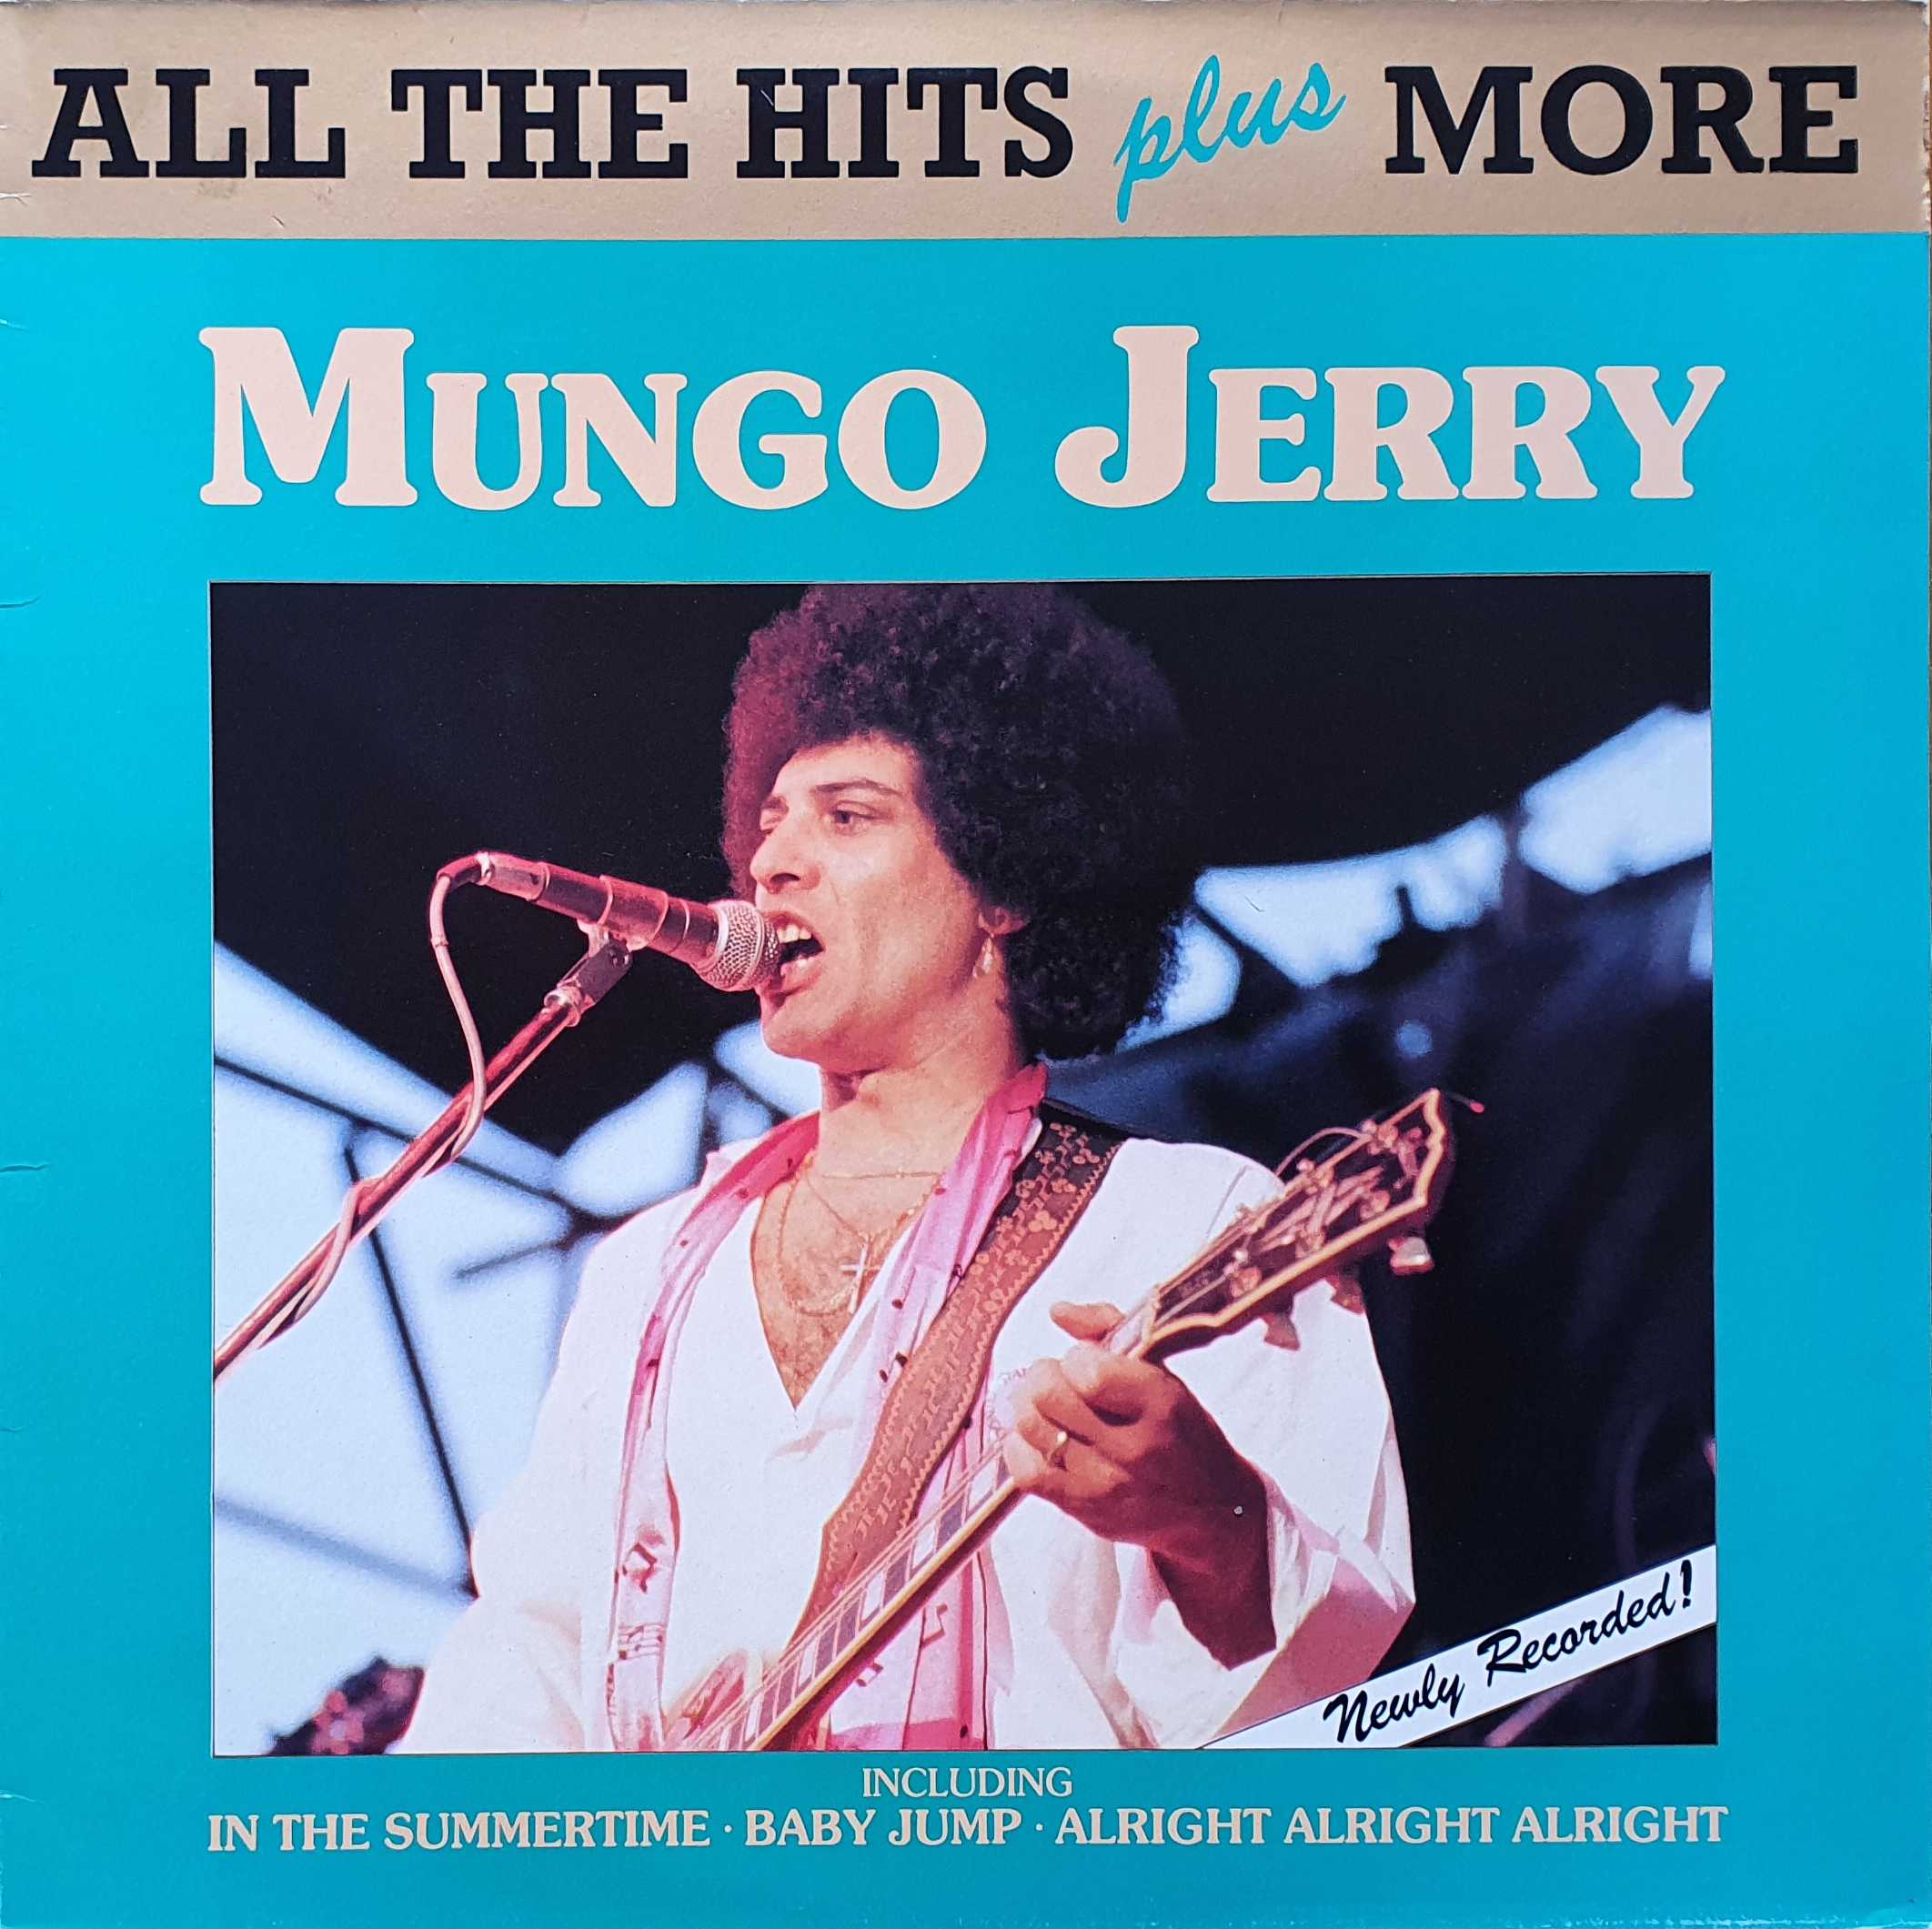 Picture of PRST 002 All the hits plus more by artist Mungo Jerry from the BBC albums - Records and Tapes library